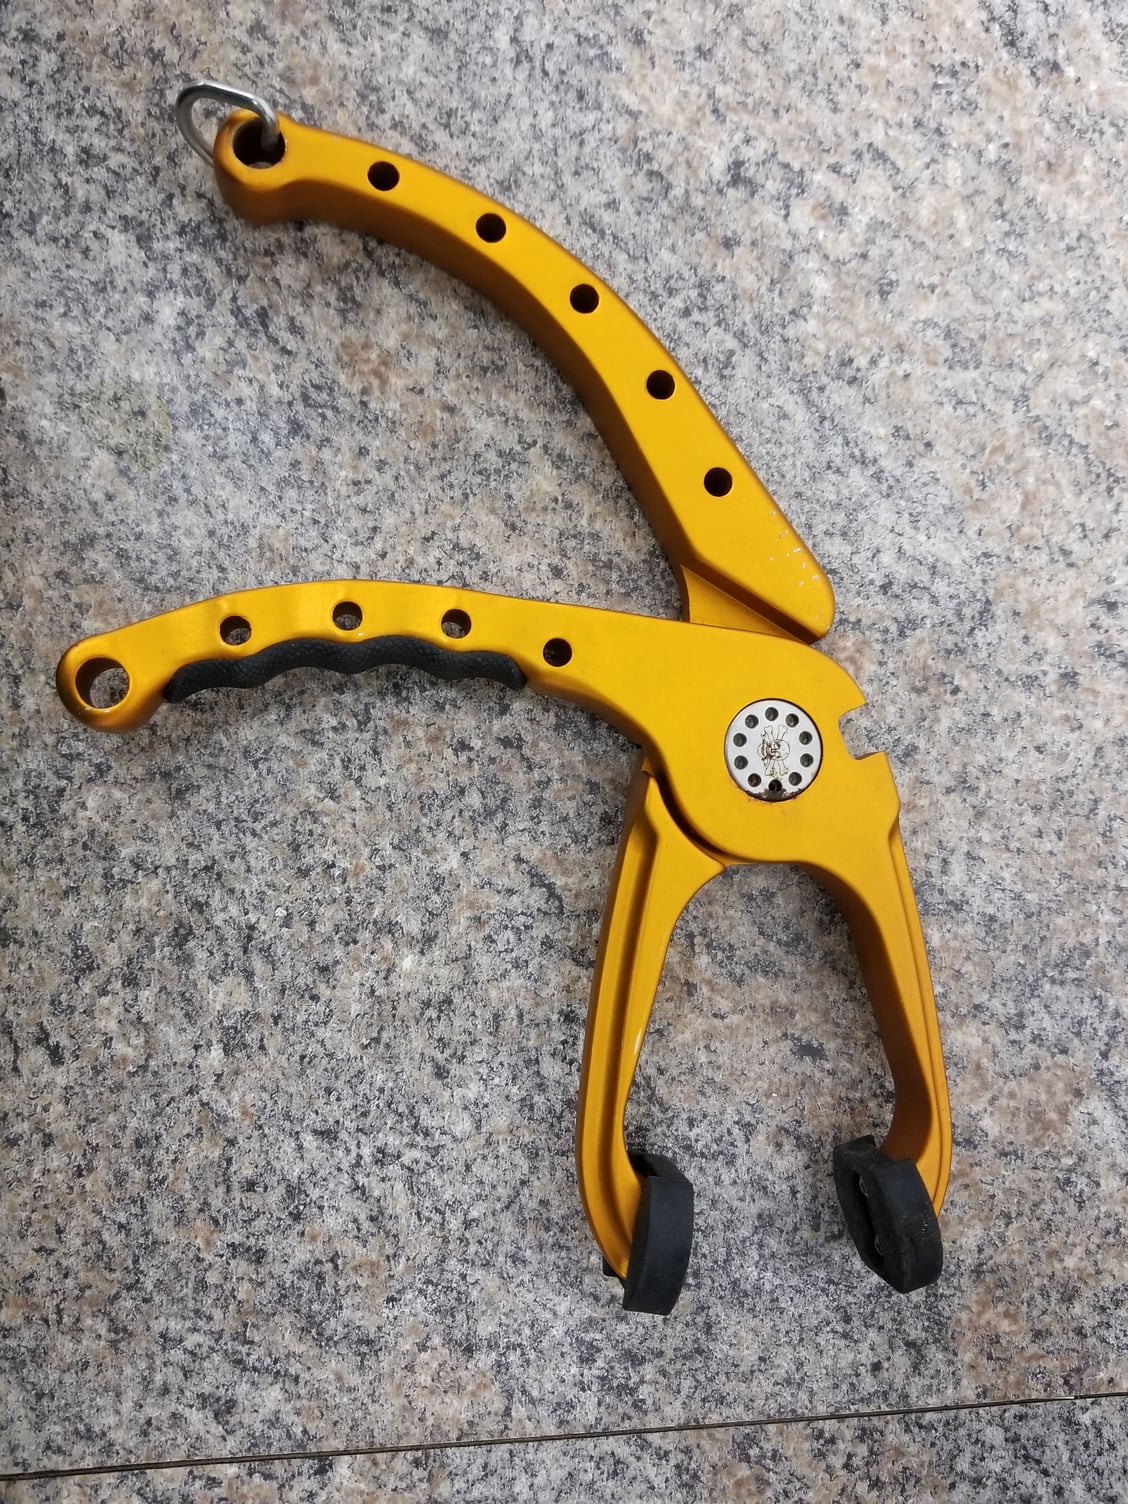 Calcutta fish lip grip pliers - The Hull Truth - Boating and